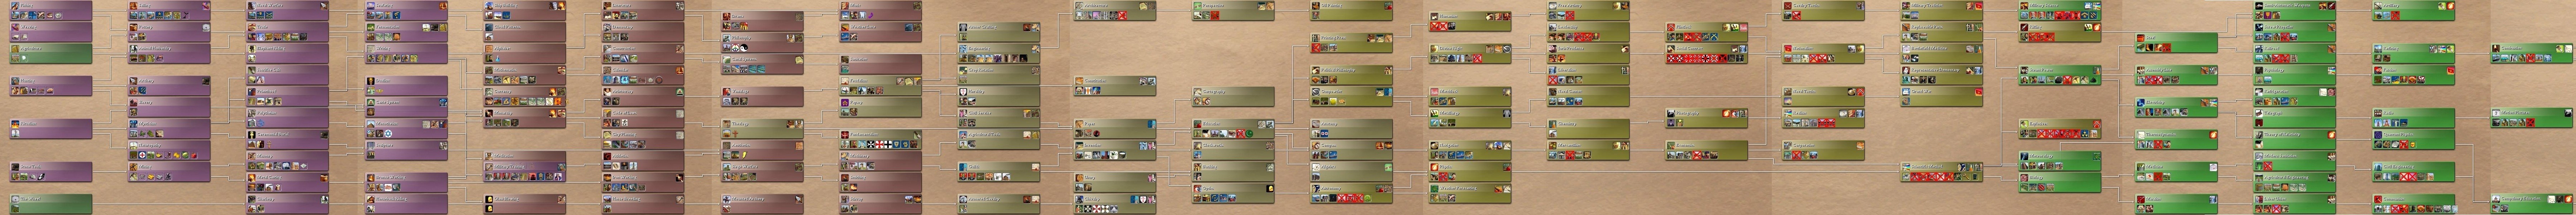 Rise Of Mankind 2.71 Tech Tree